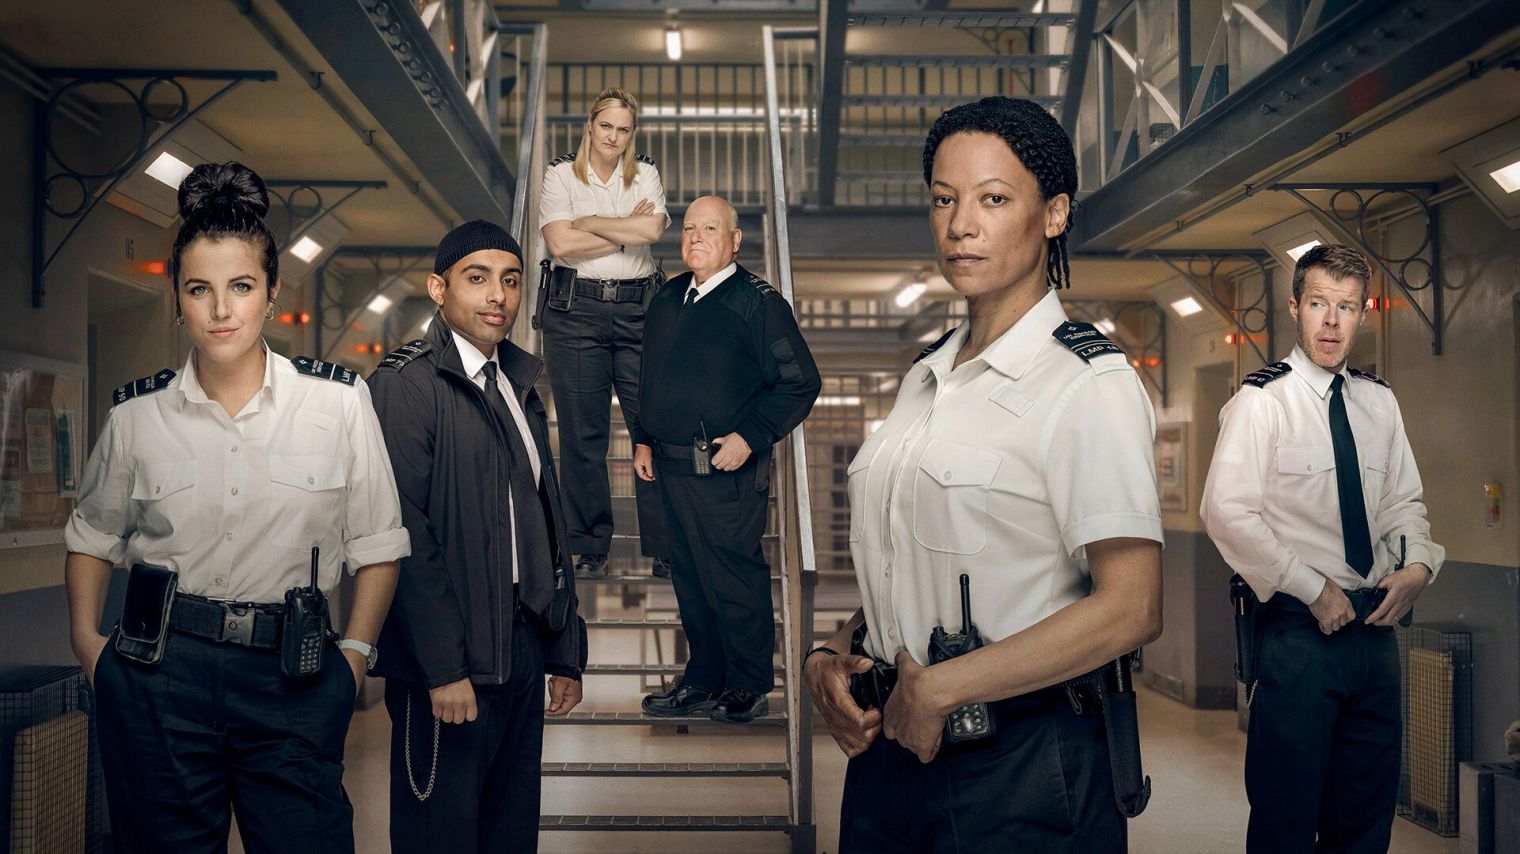 Channel 4 has commissioned a second series of prison comedy Screw, starring Laura Checkley